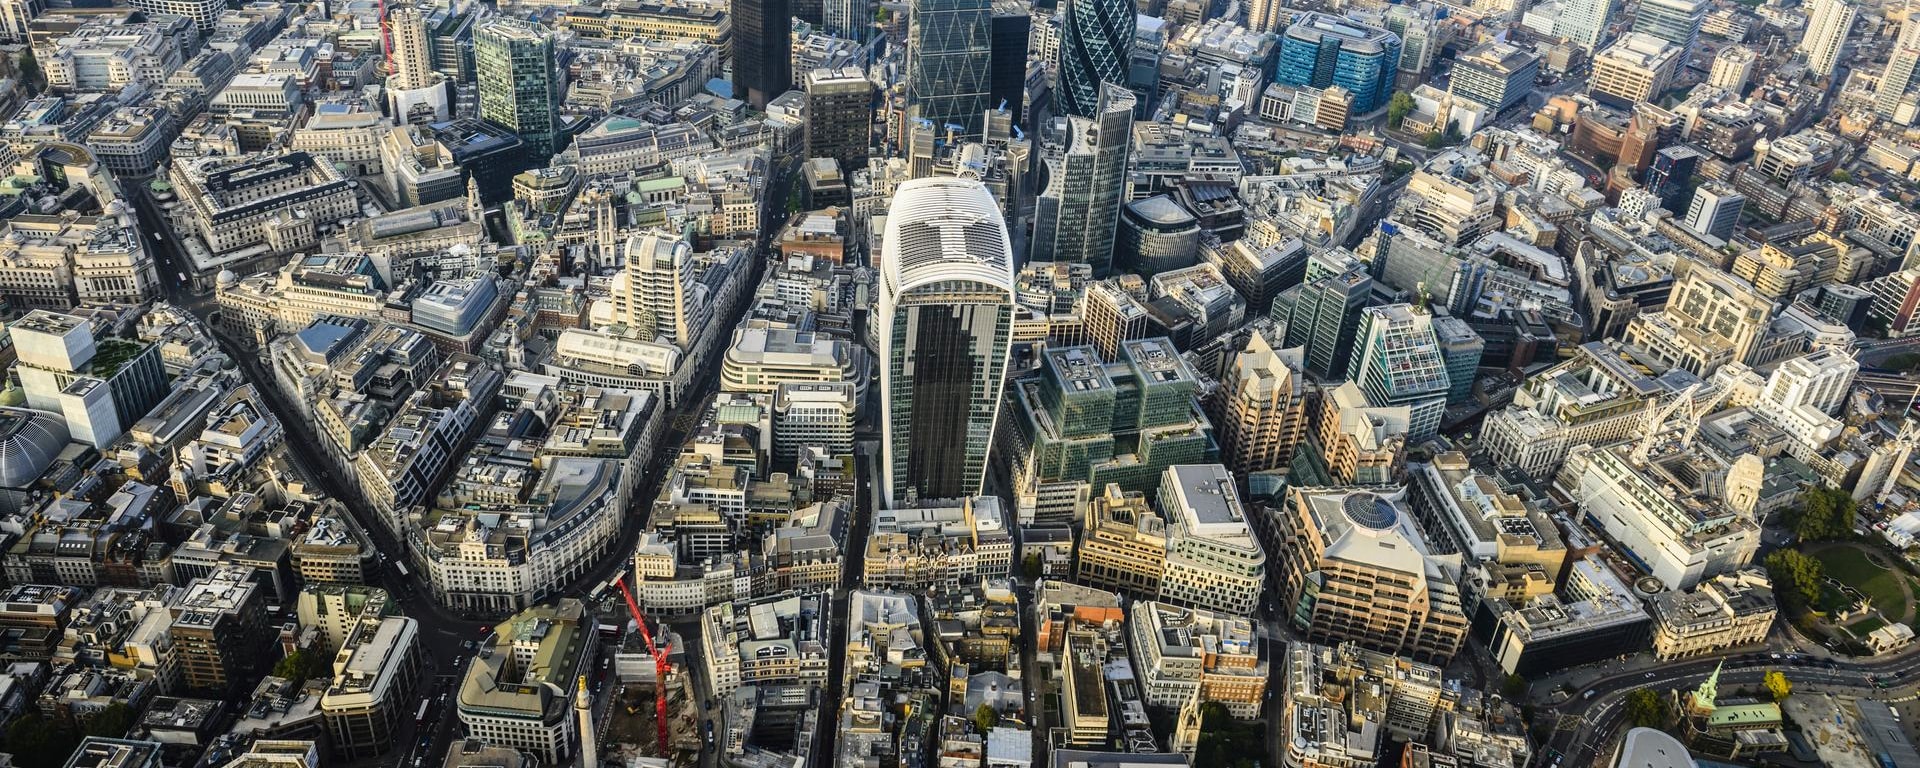 A picture of the city of London, where TwentyFour Asset Management LLP is located